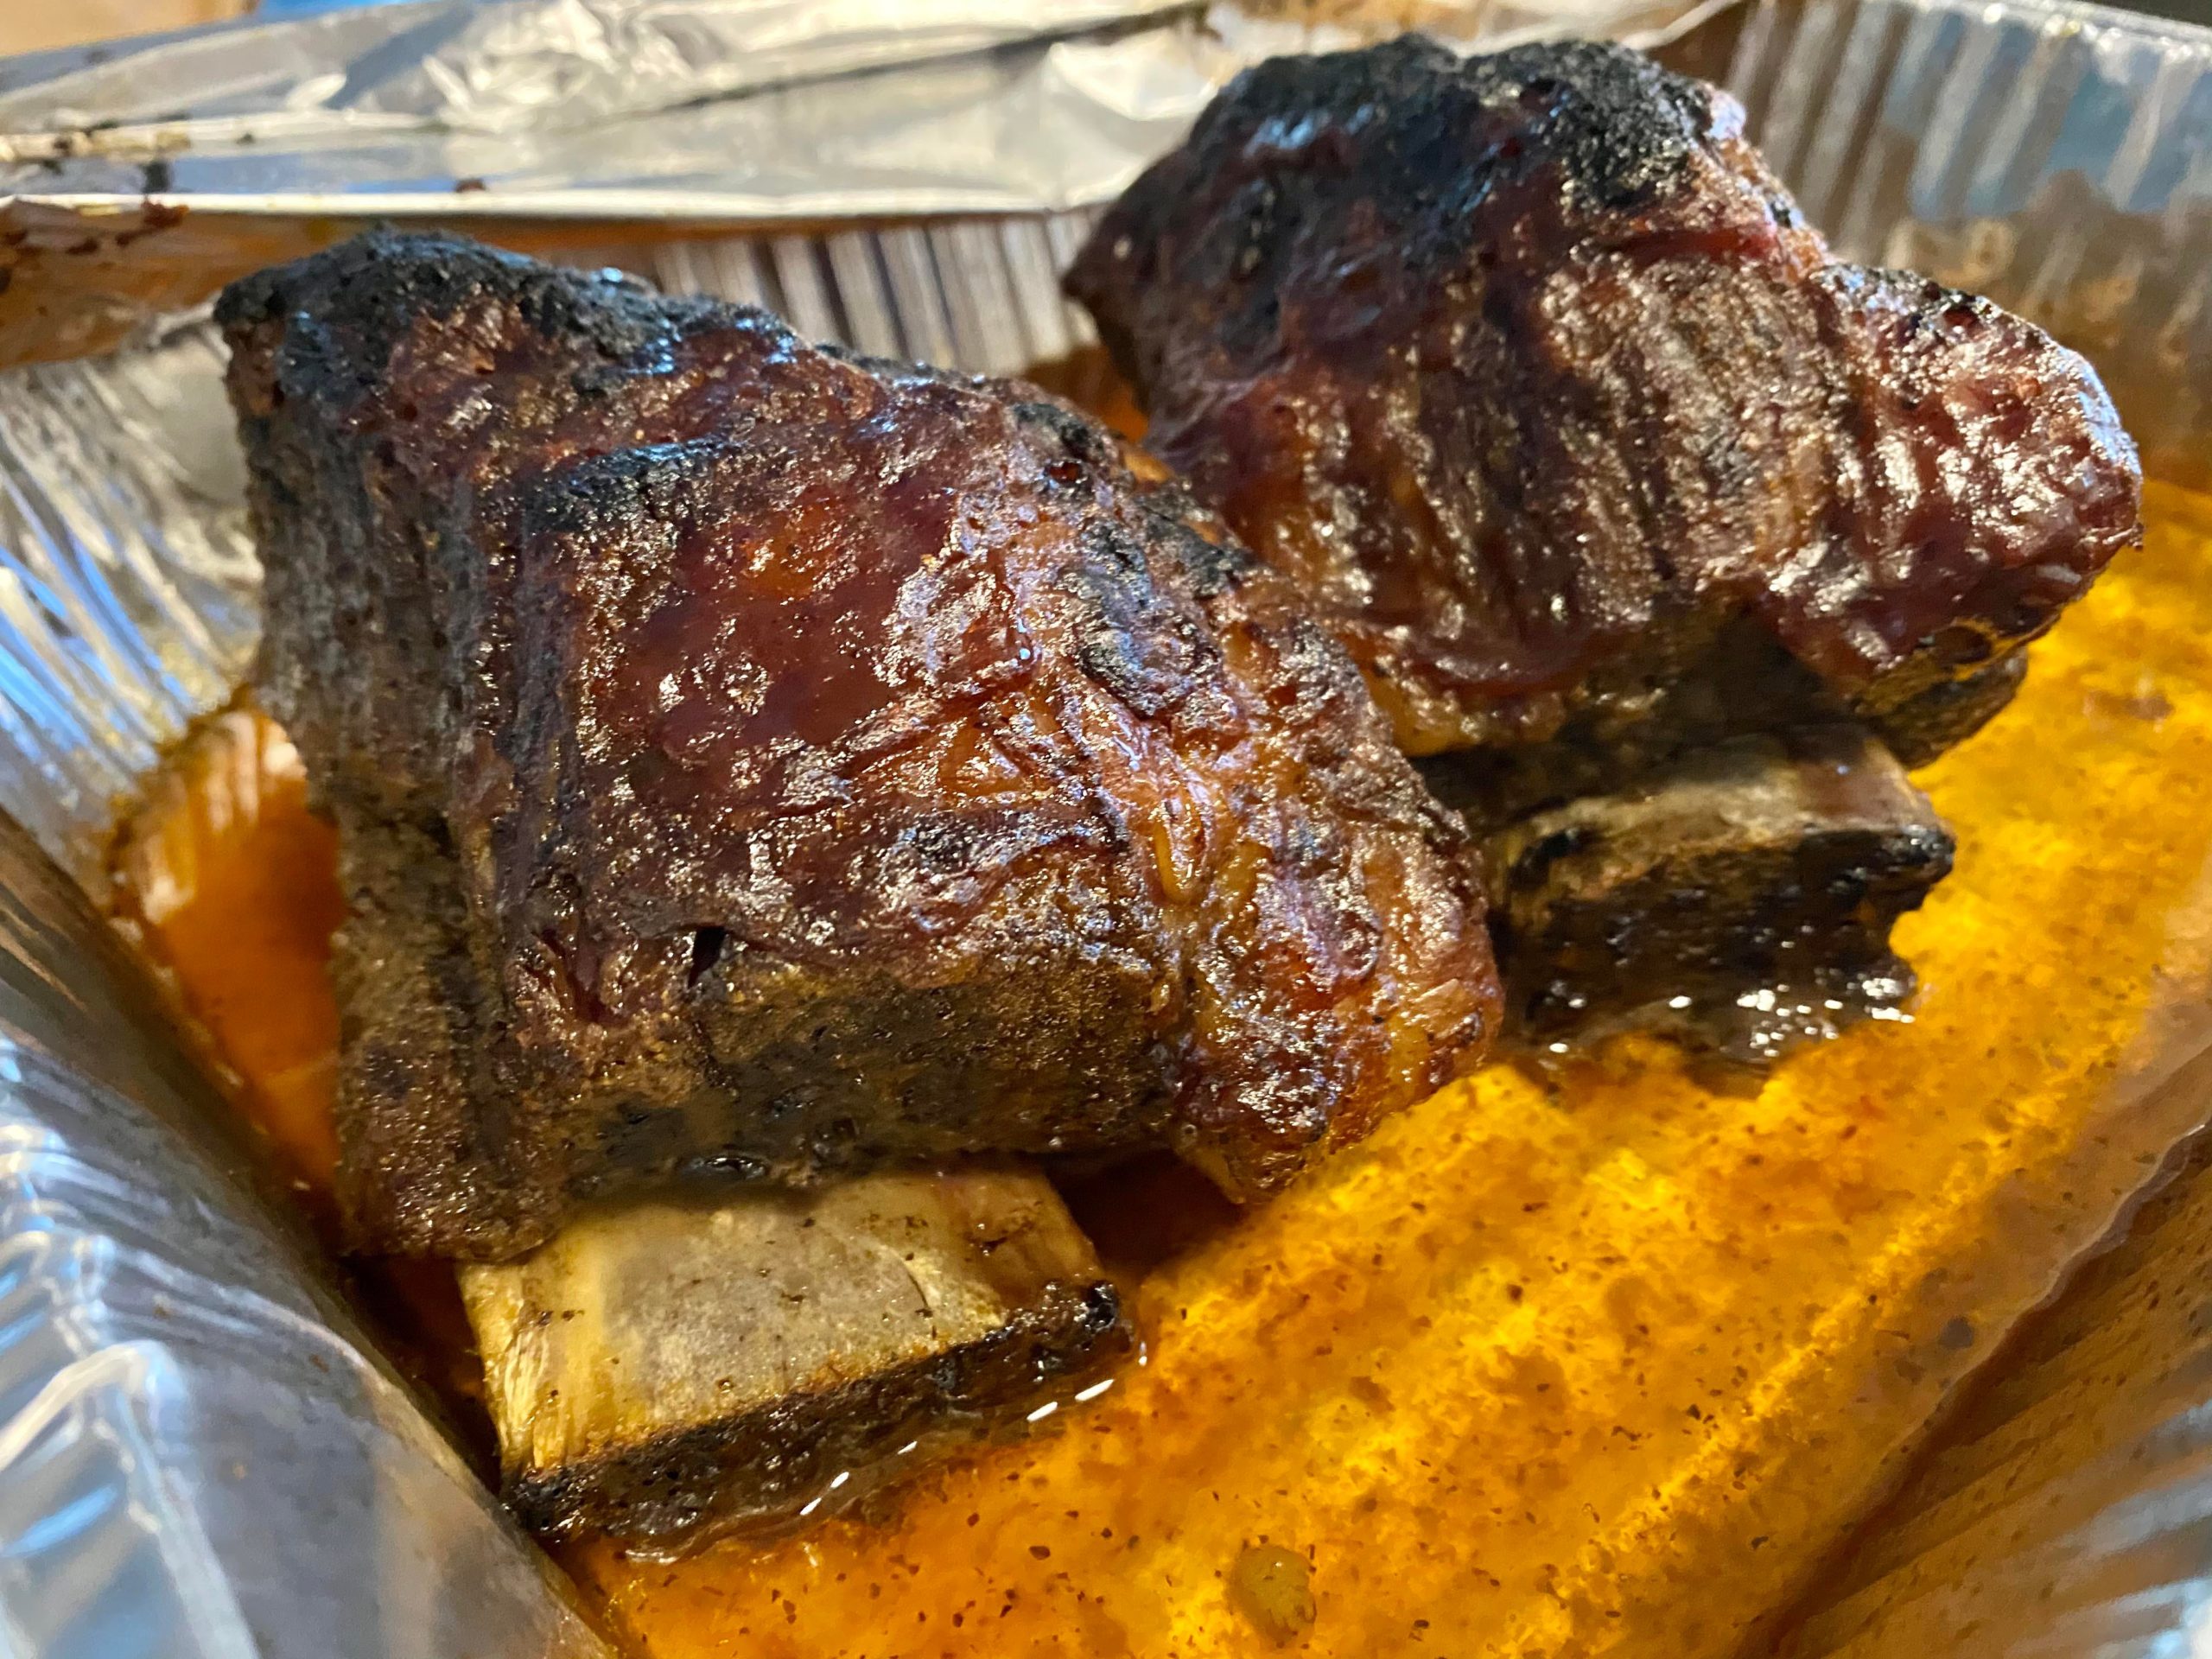 Oven baked short ribs for dinner. - Dining and Cooking